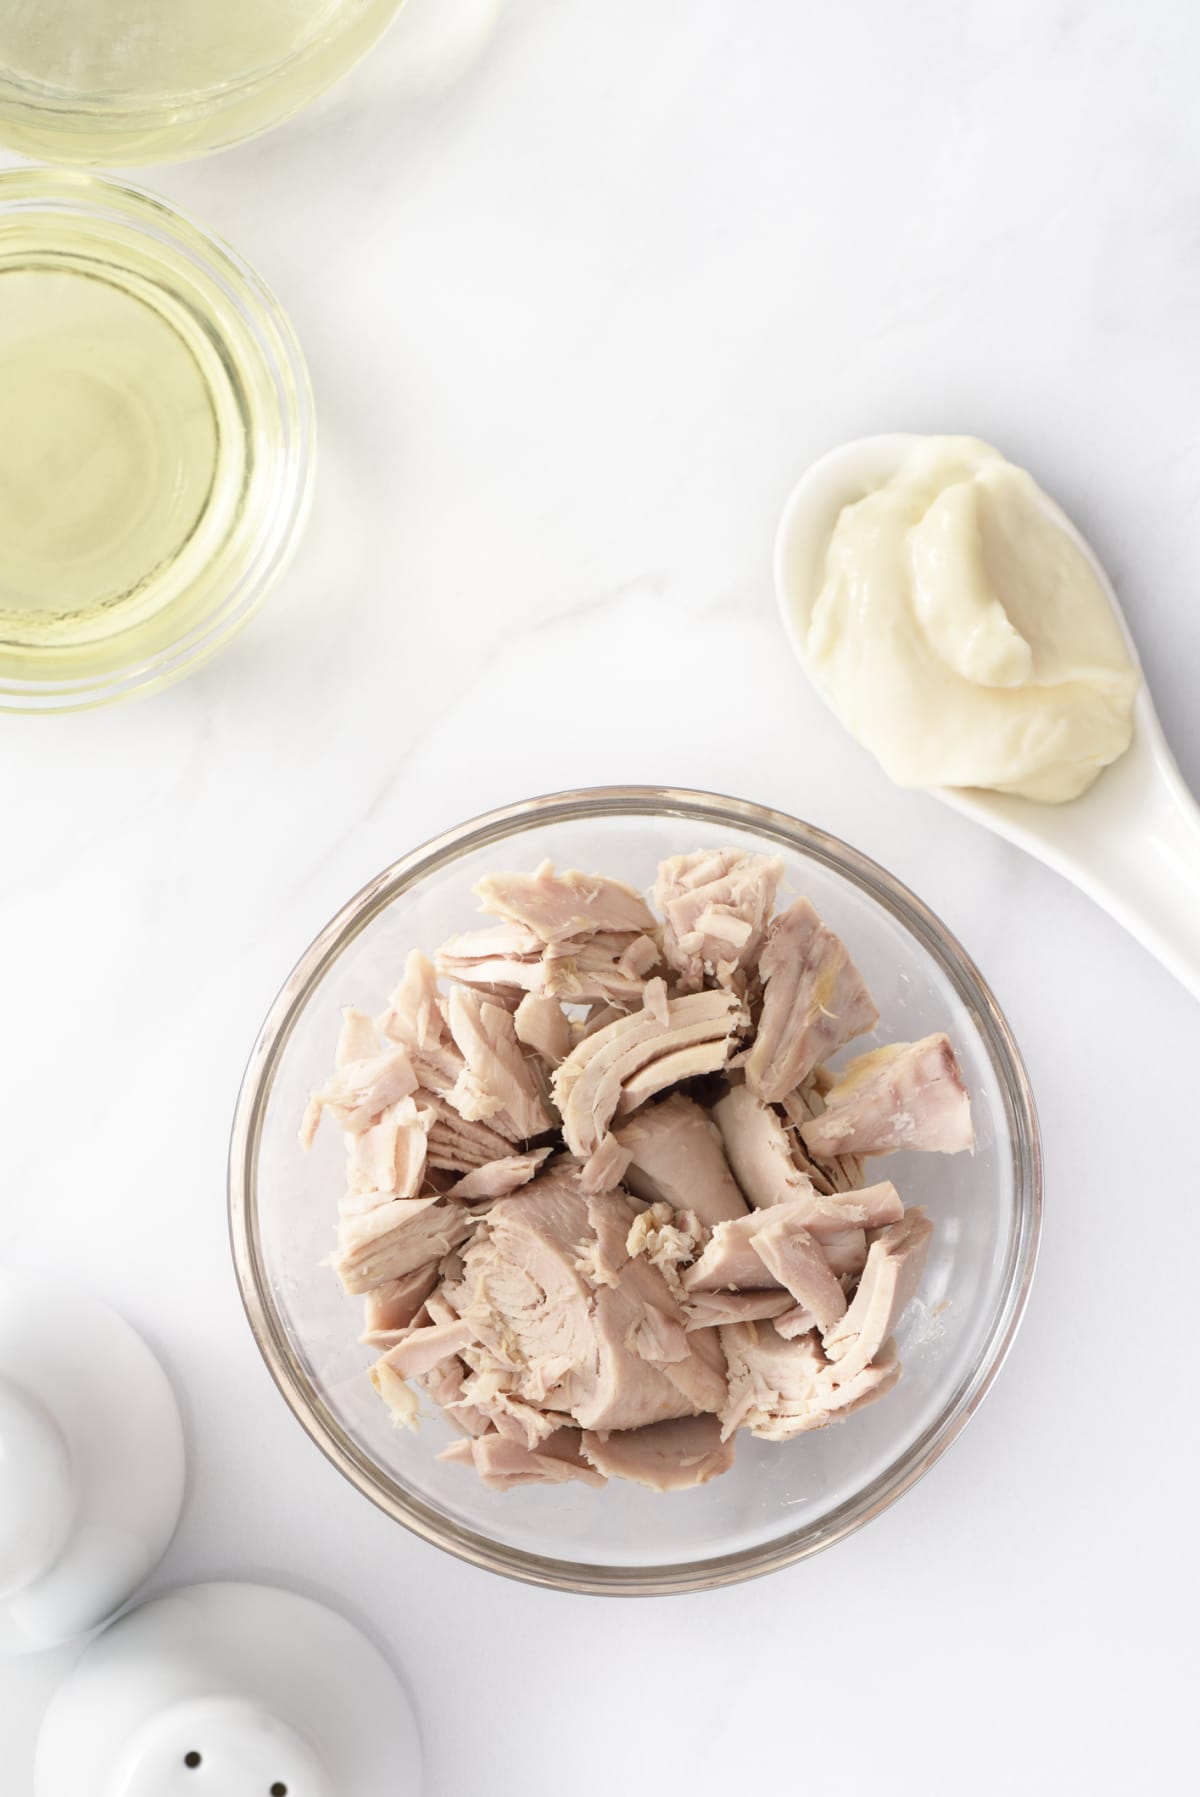 Preparing tuna salad with flaked tuna and mayonnaise on white background